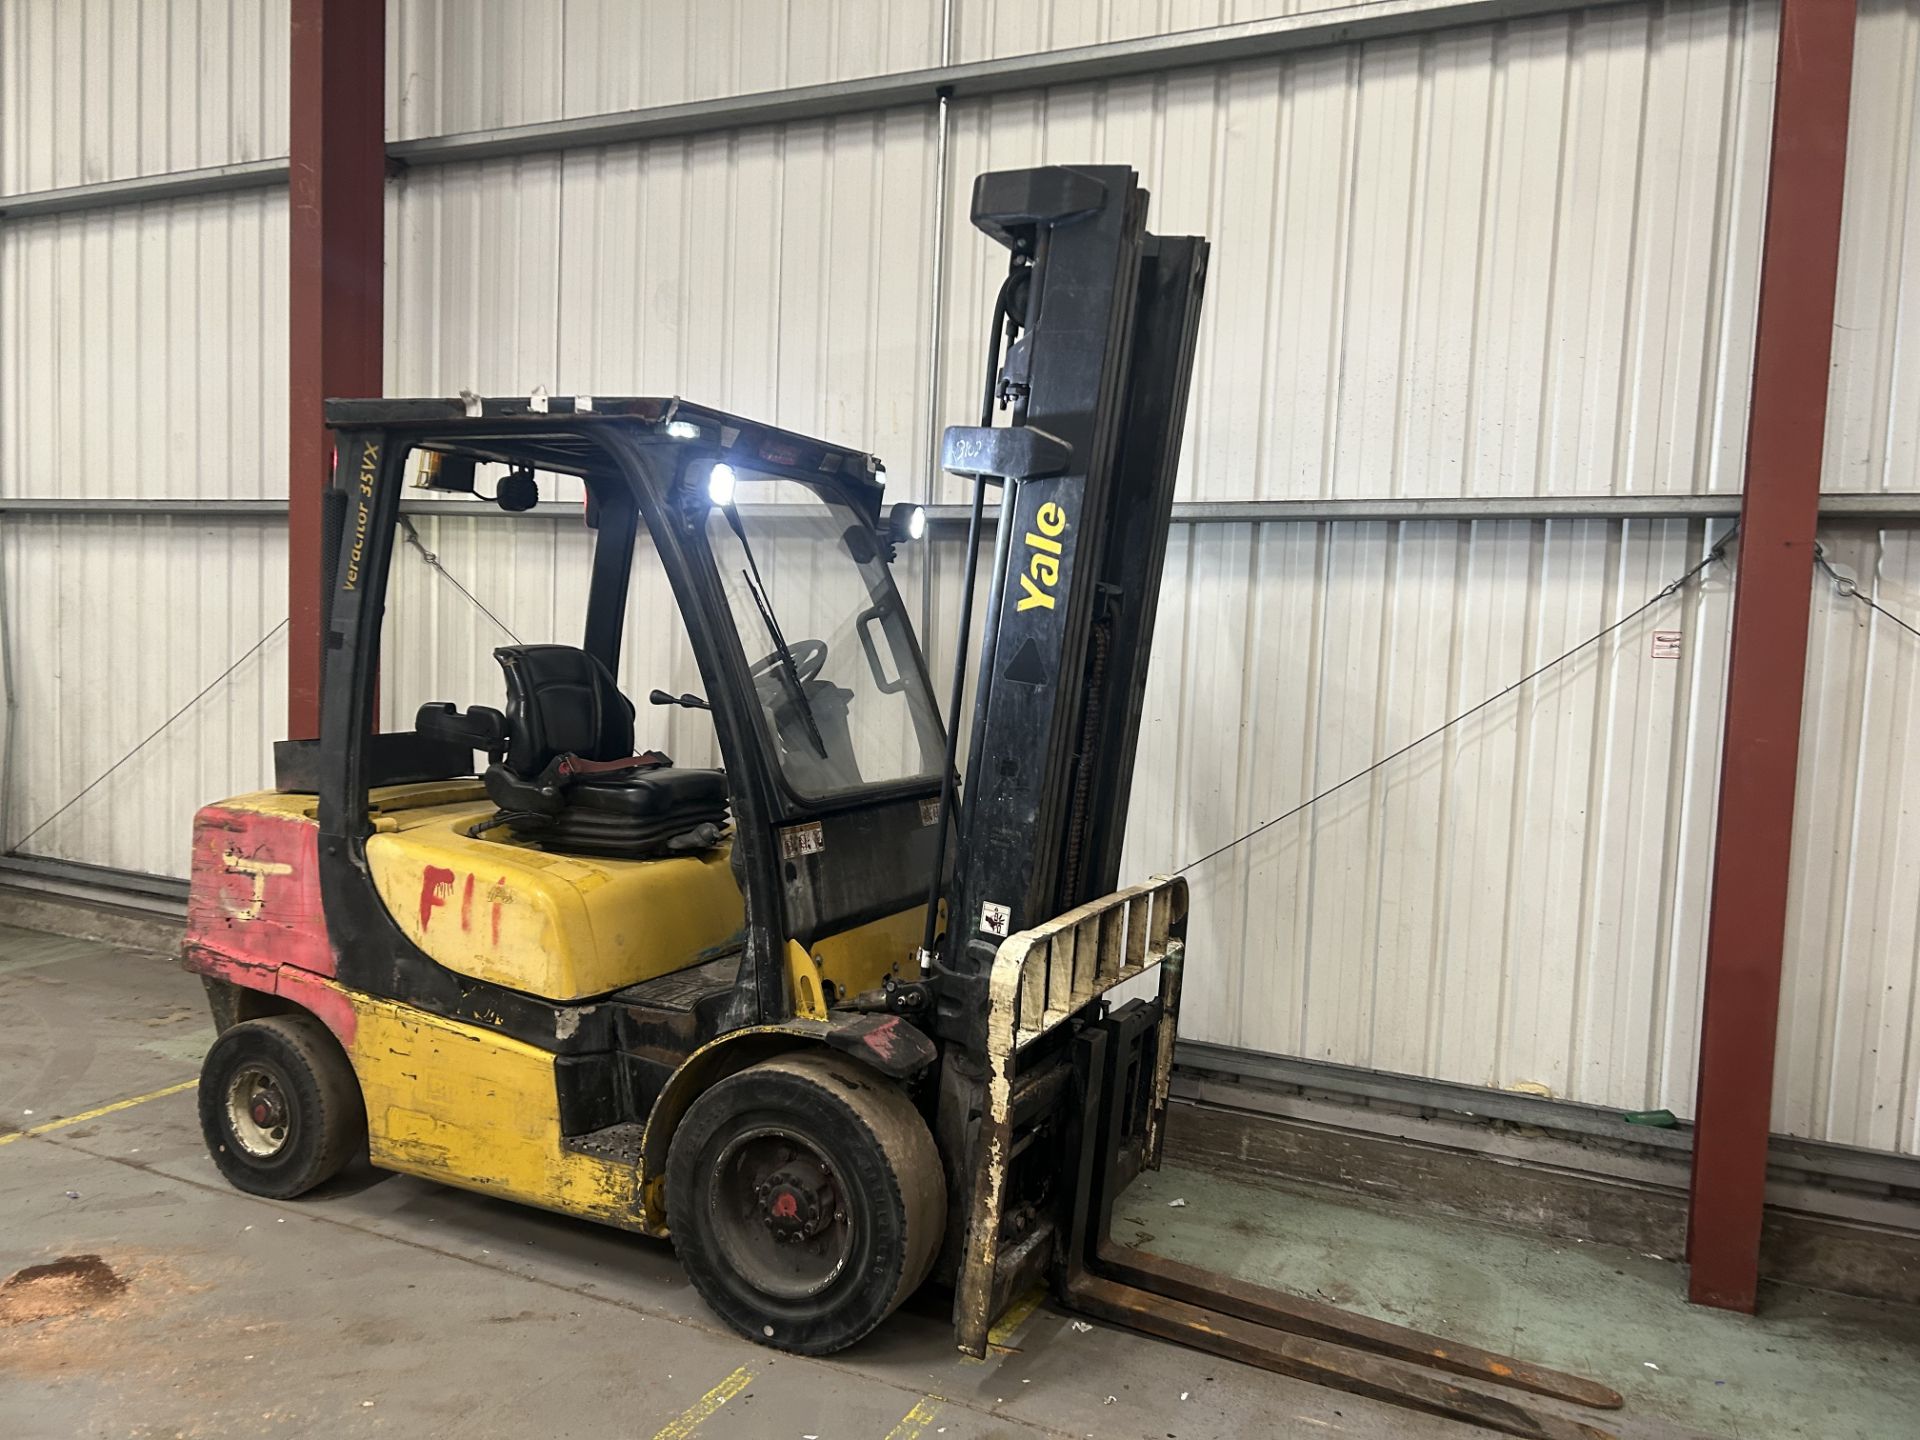 >>>SPECIAL CLEARANCE<<< DIESEL FORKLIFTS YALE GDP35VX - Image 3 of 6